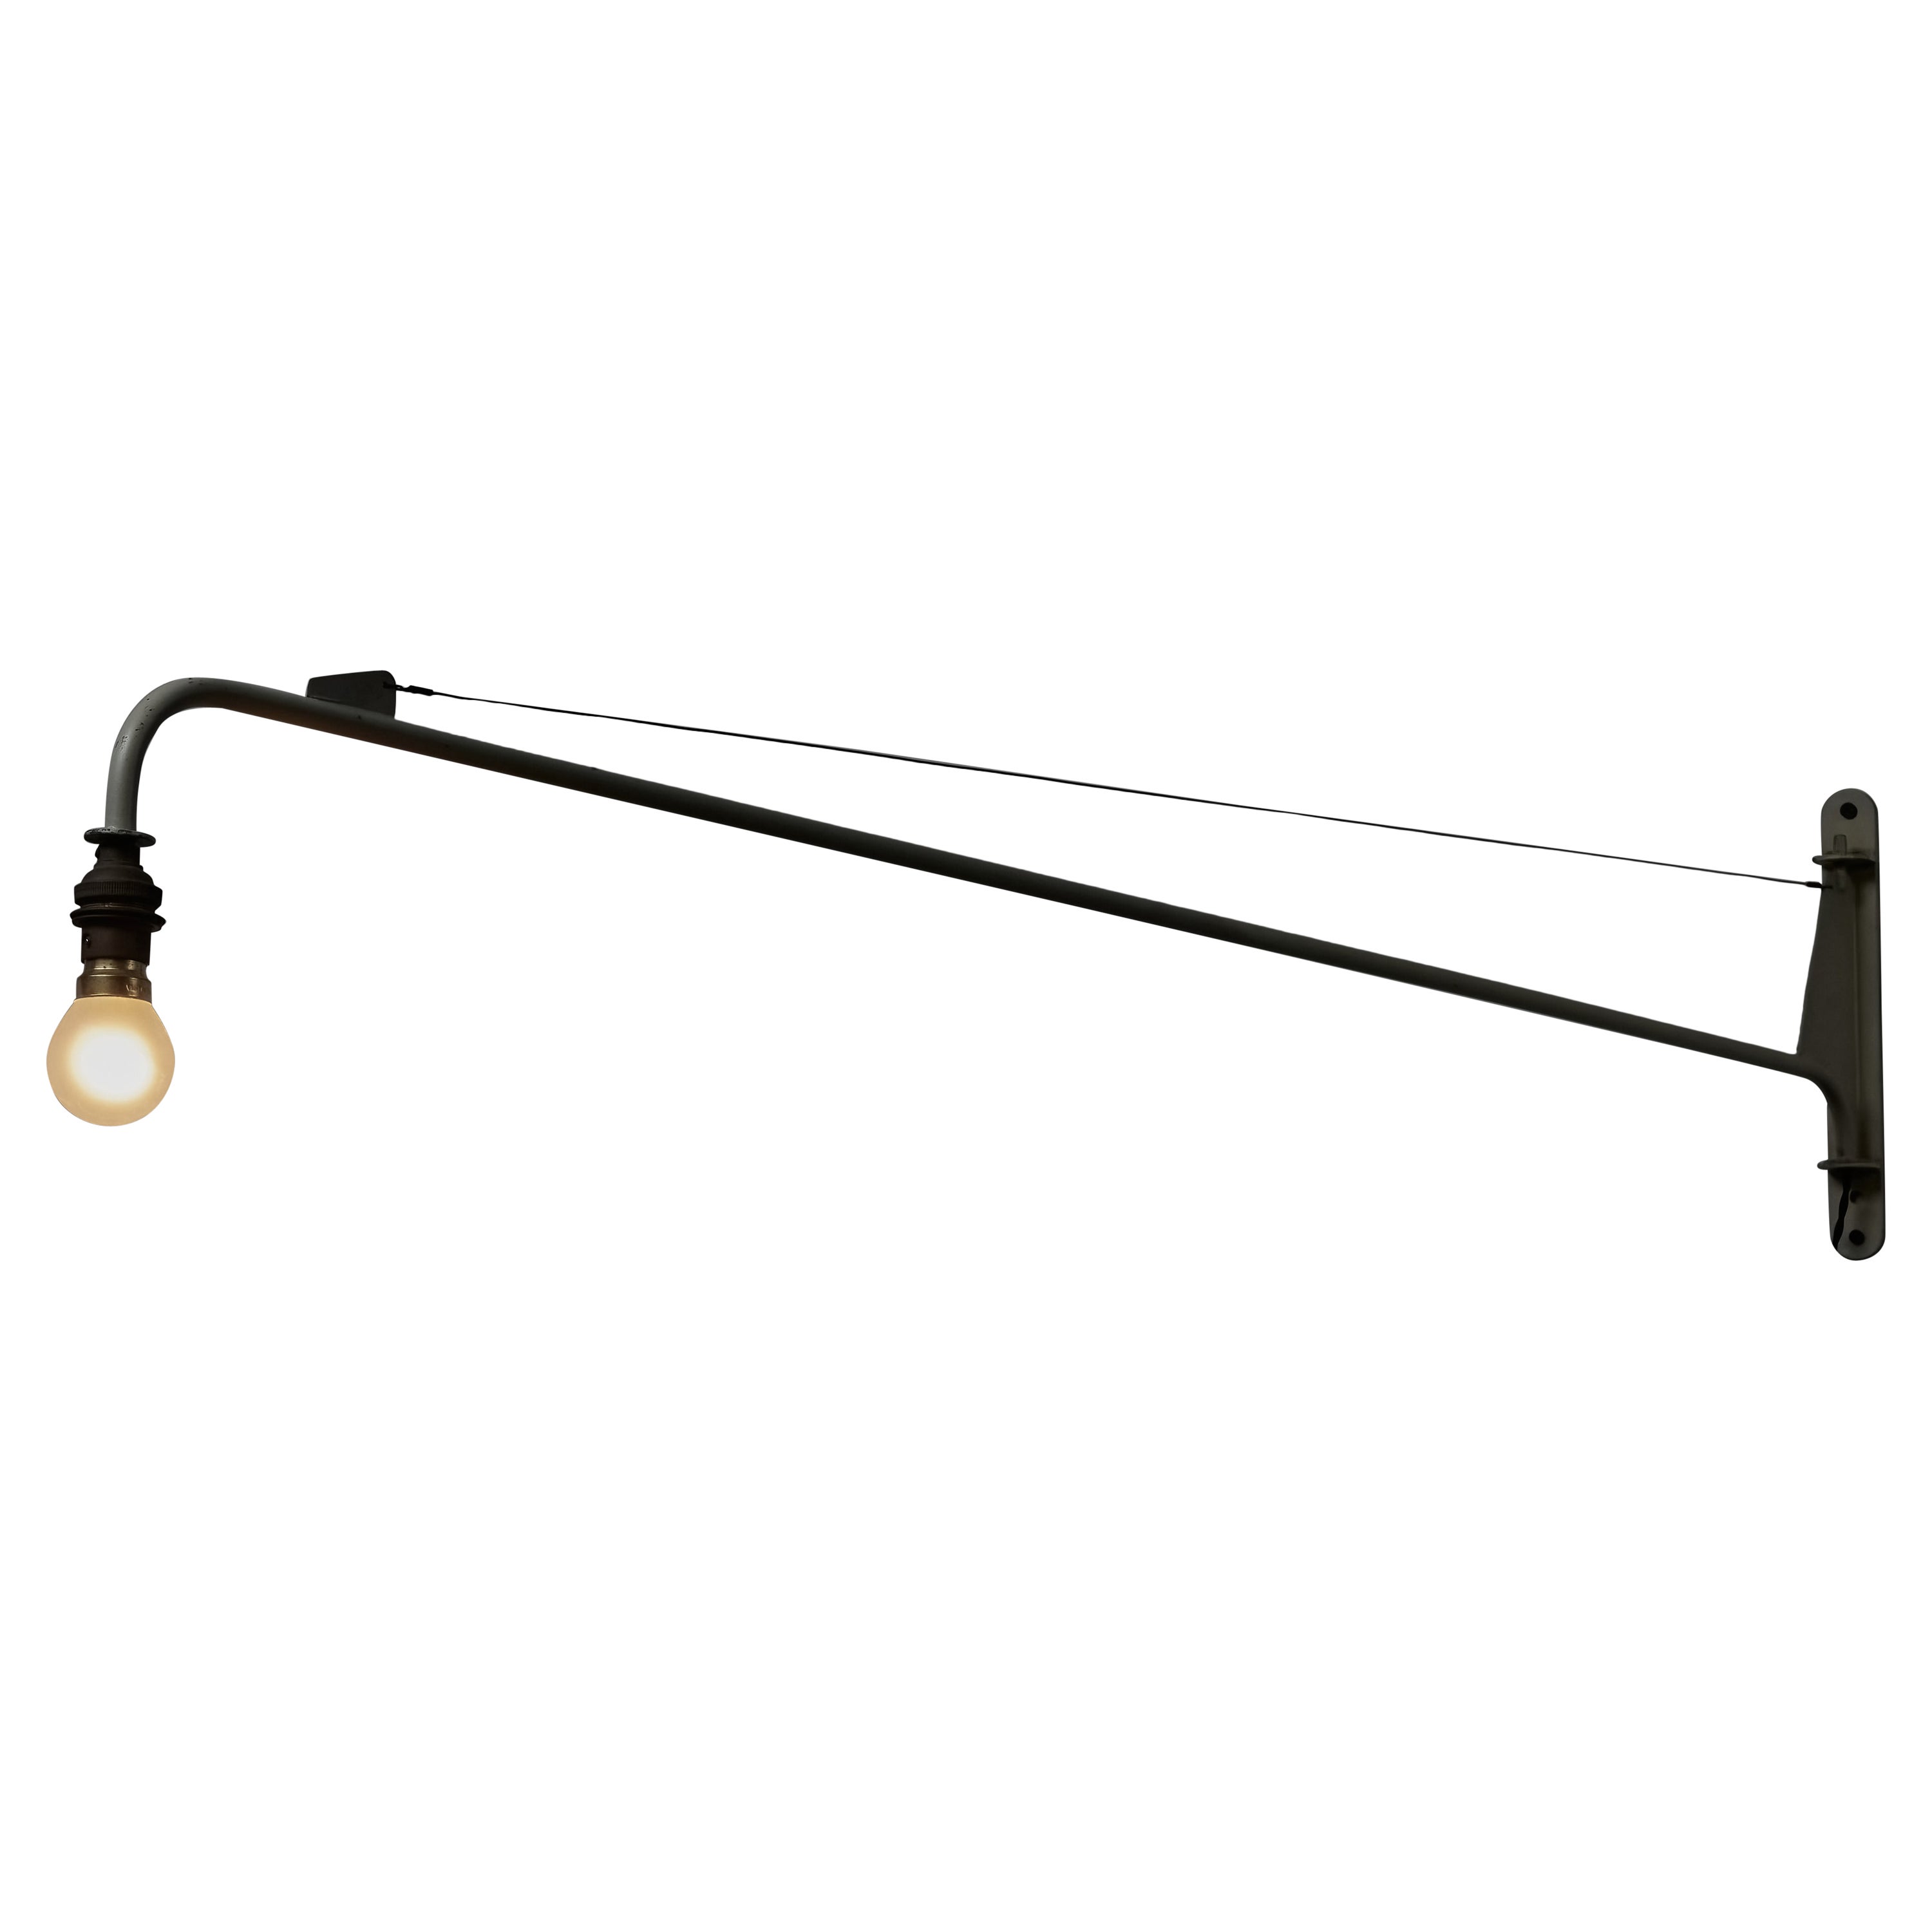 'Potence D'eclairage' Swing Jib Wall Light by Jean Prouve For Sale